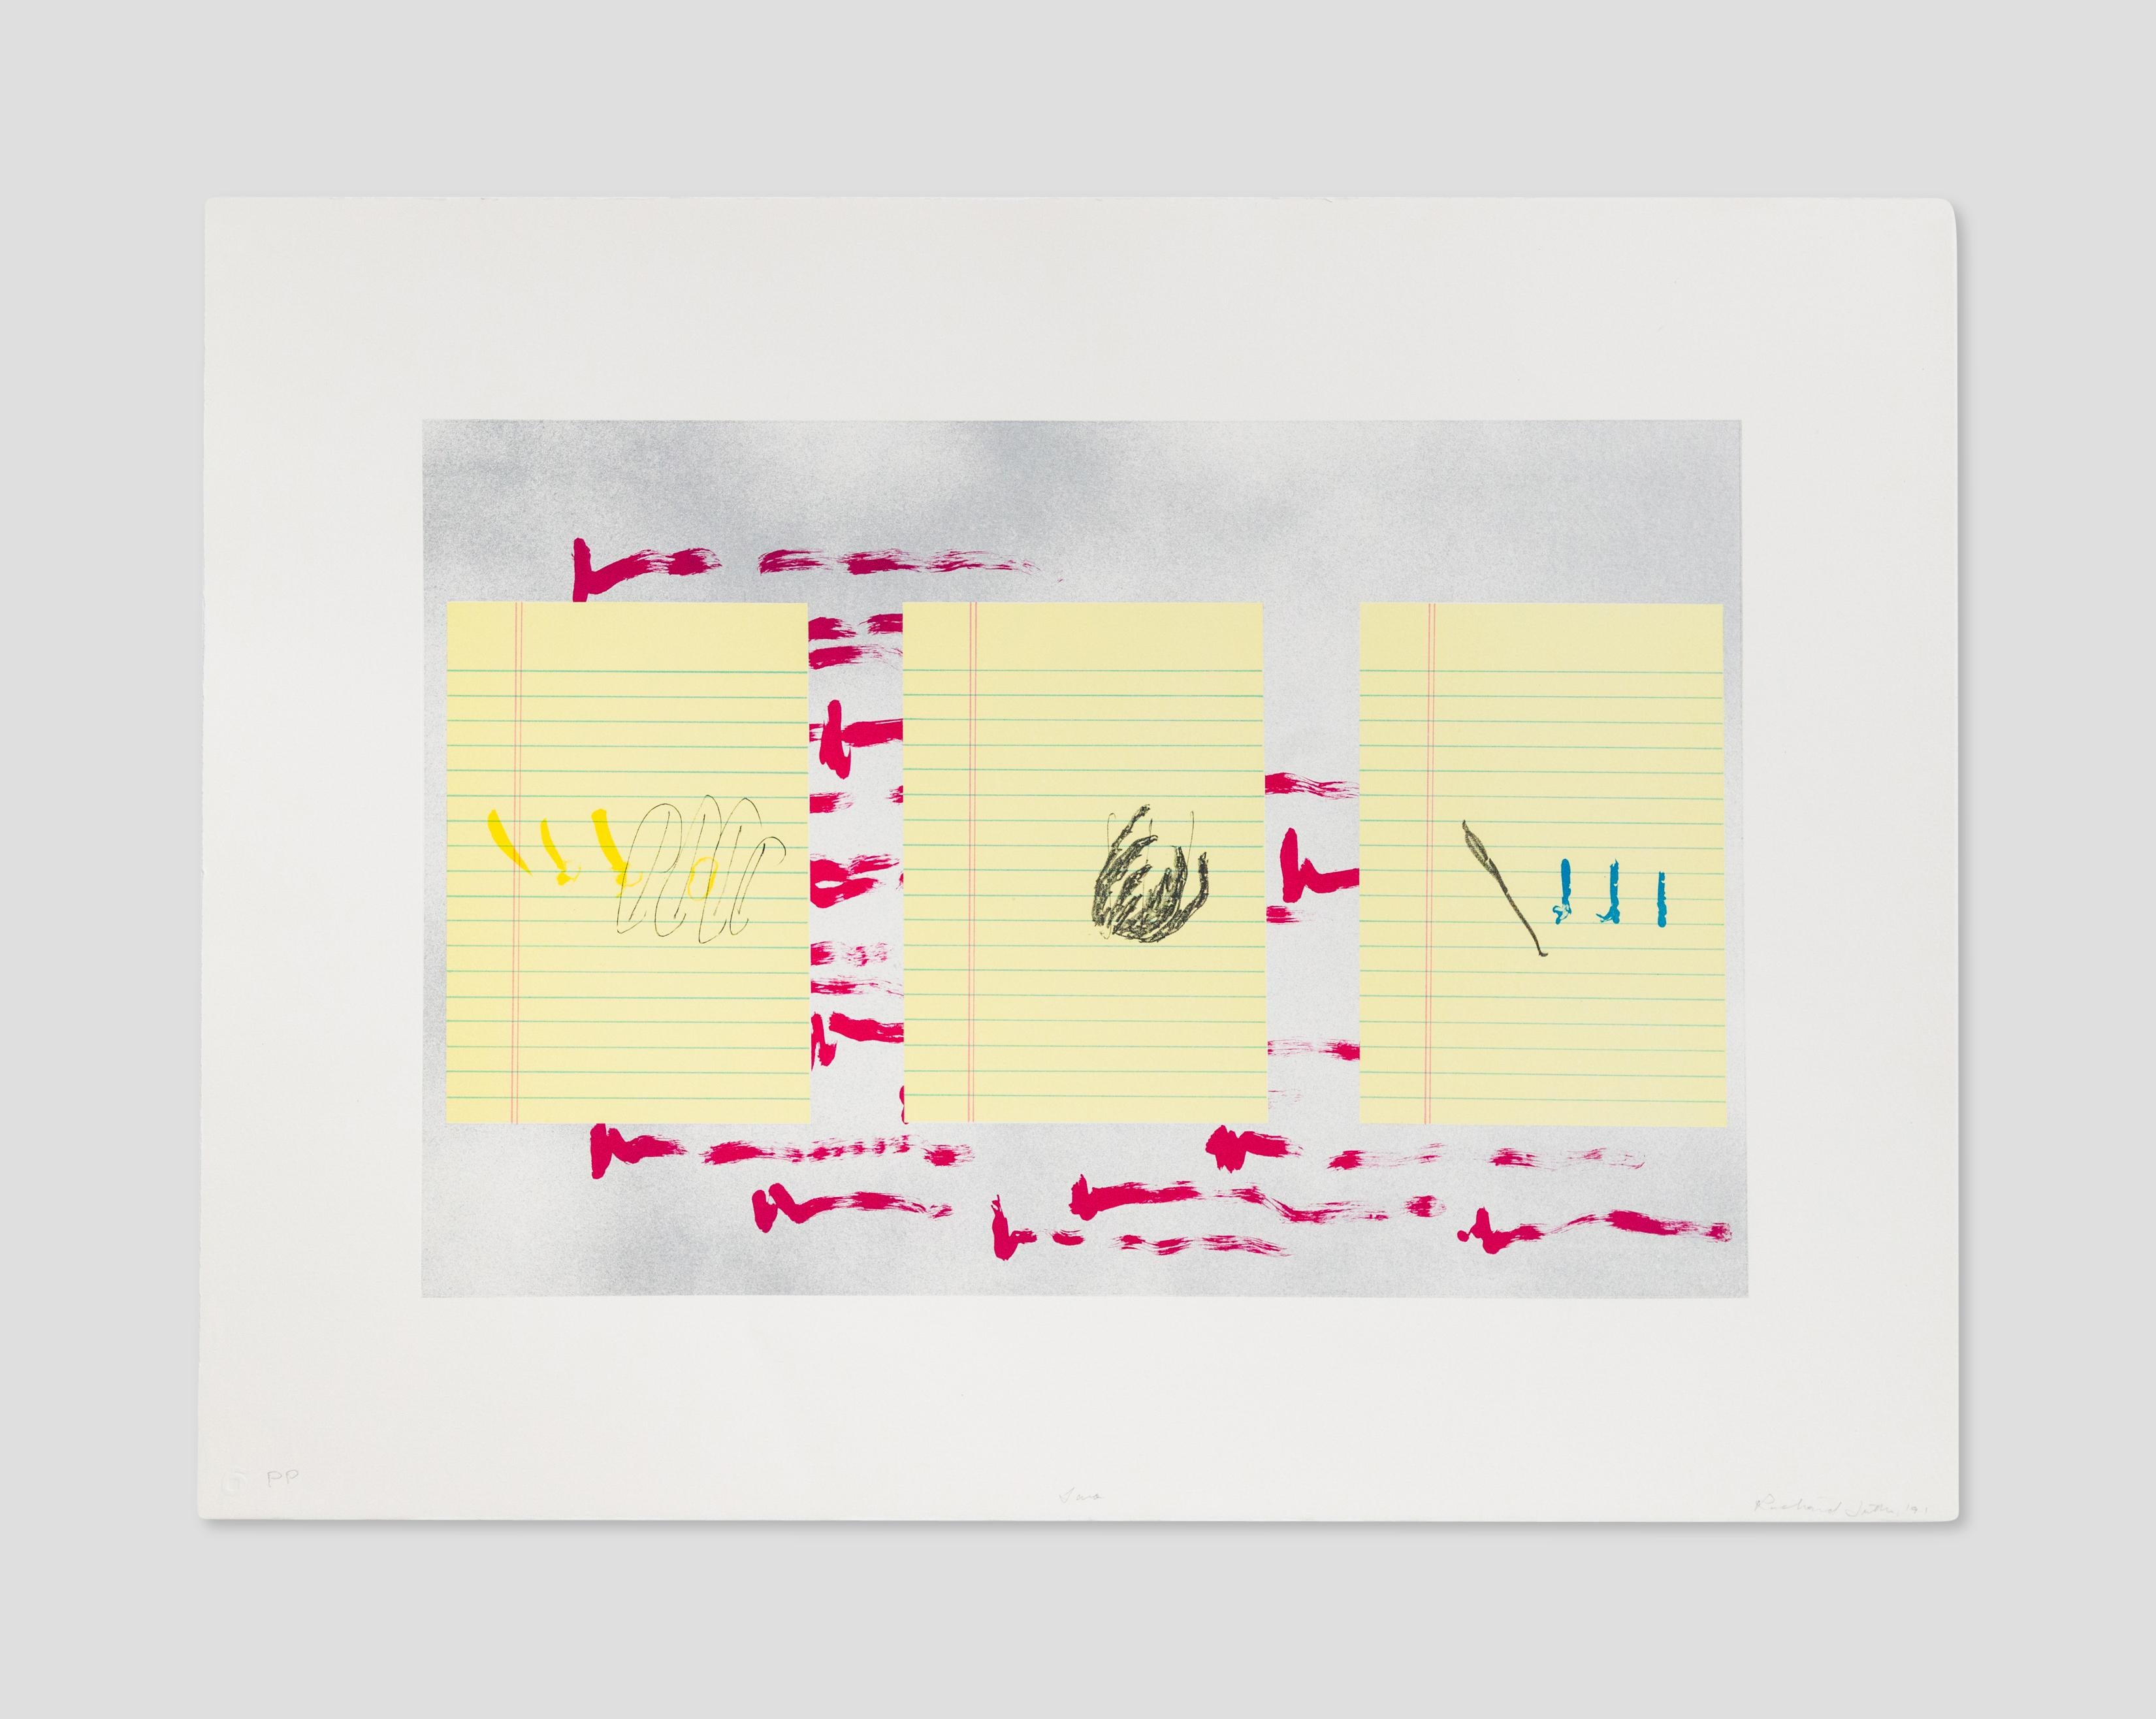 A Sunny Day - Print by Richard Tuttle